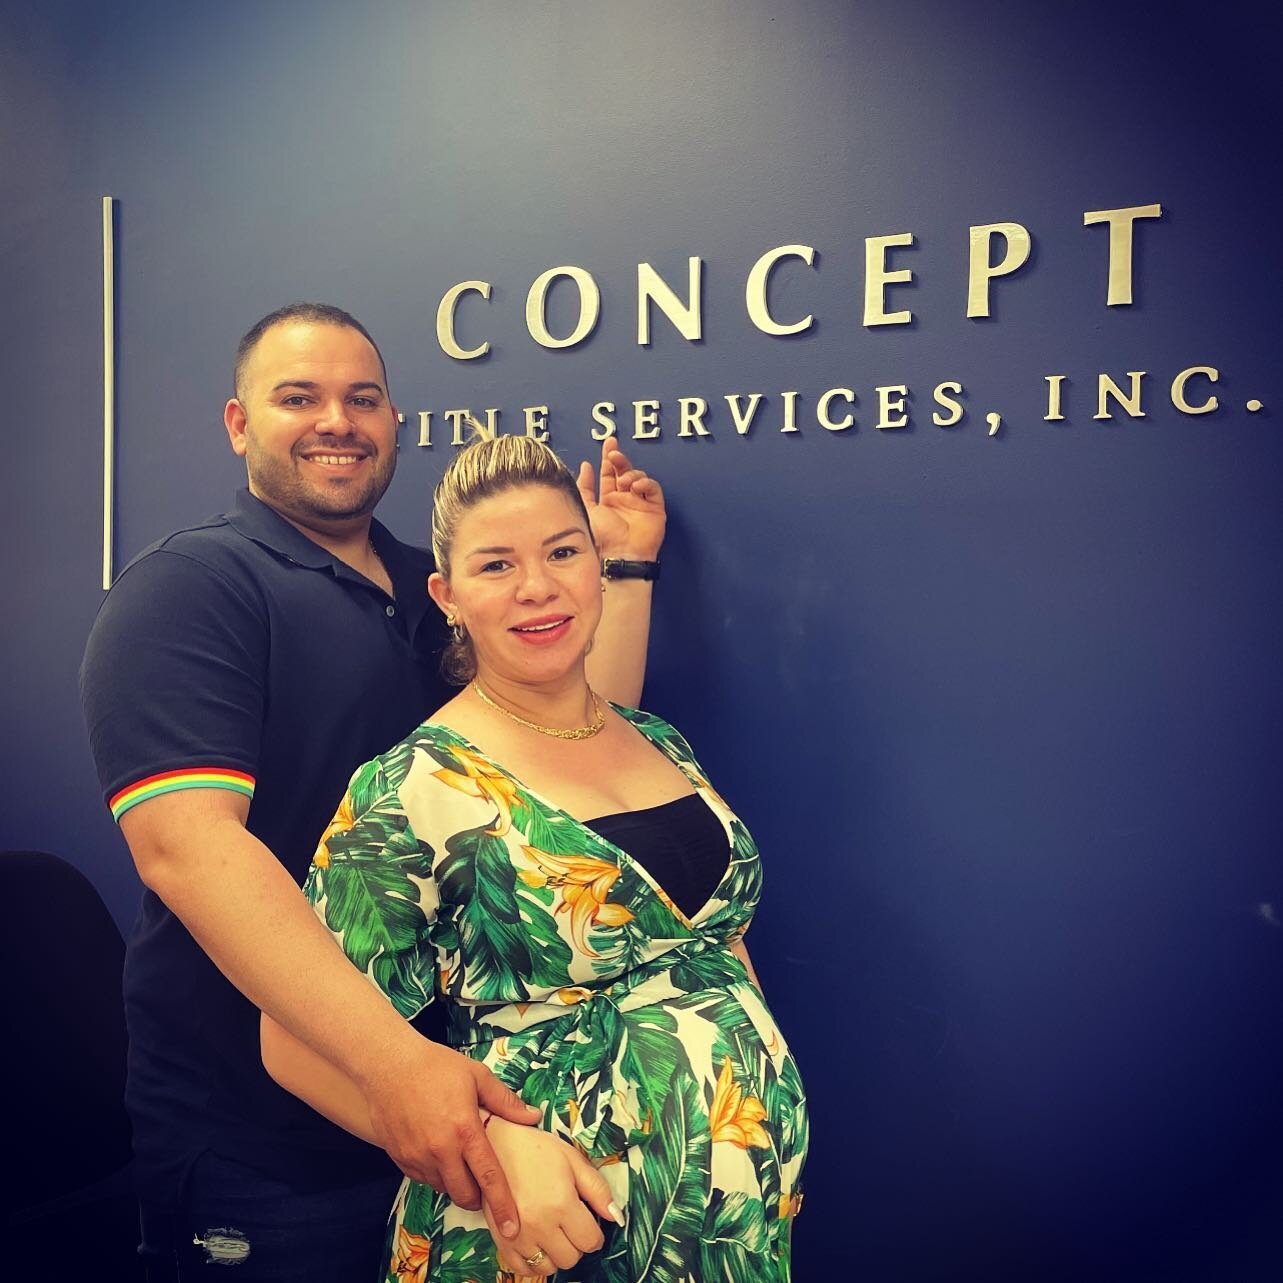 We are so happy for this beautiful family. They closed on their new home just in time to welcome their new addition. We wish you all the best!!! 🎉🎊🎉😊🏦 #realestate #closings #realestateclosings #southflorida #titlecompanies #attorneys #realestate